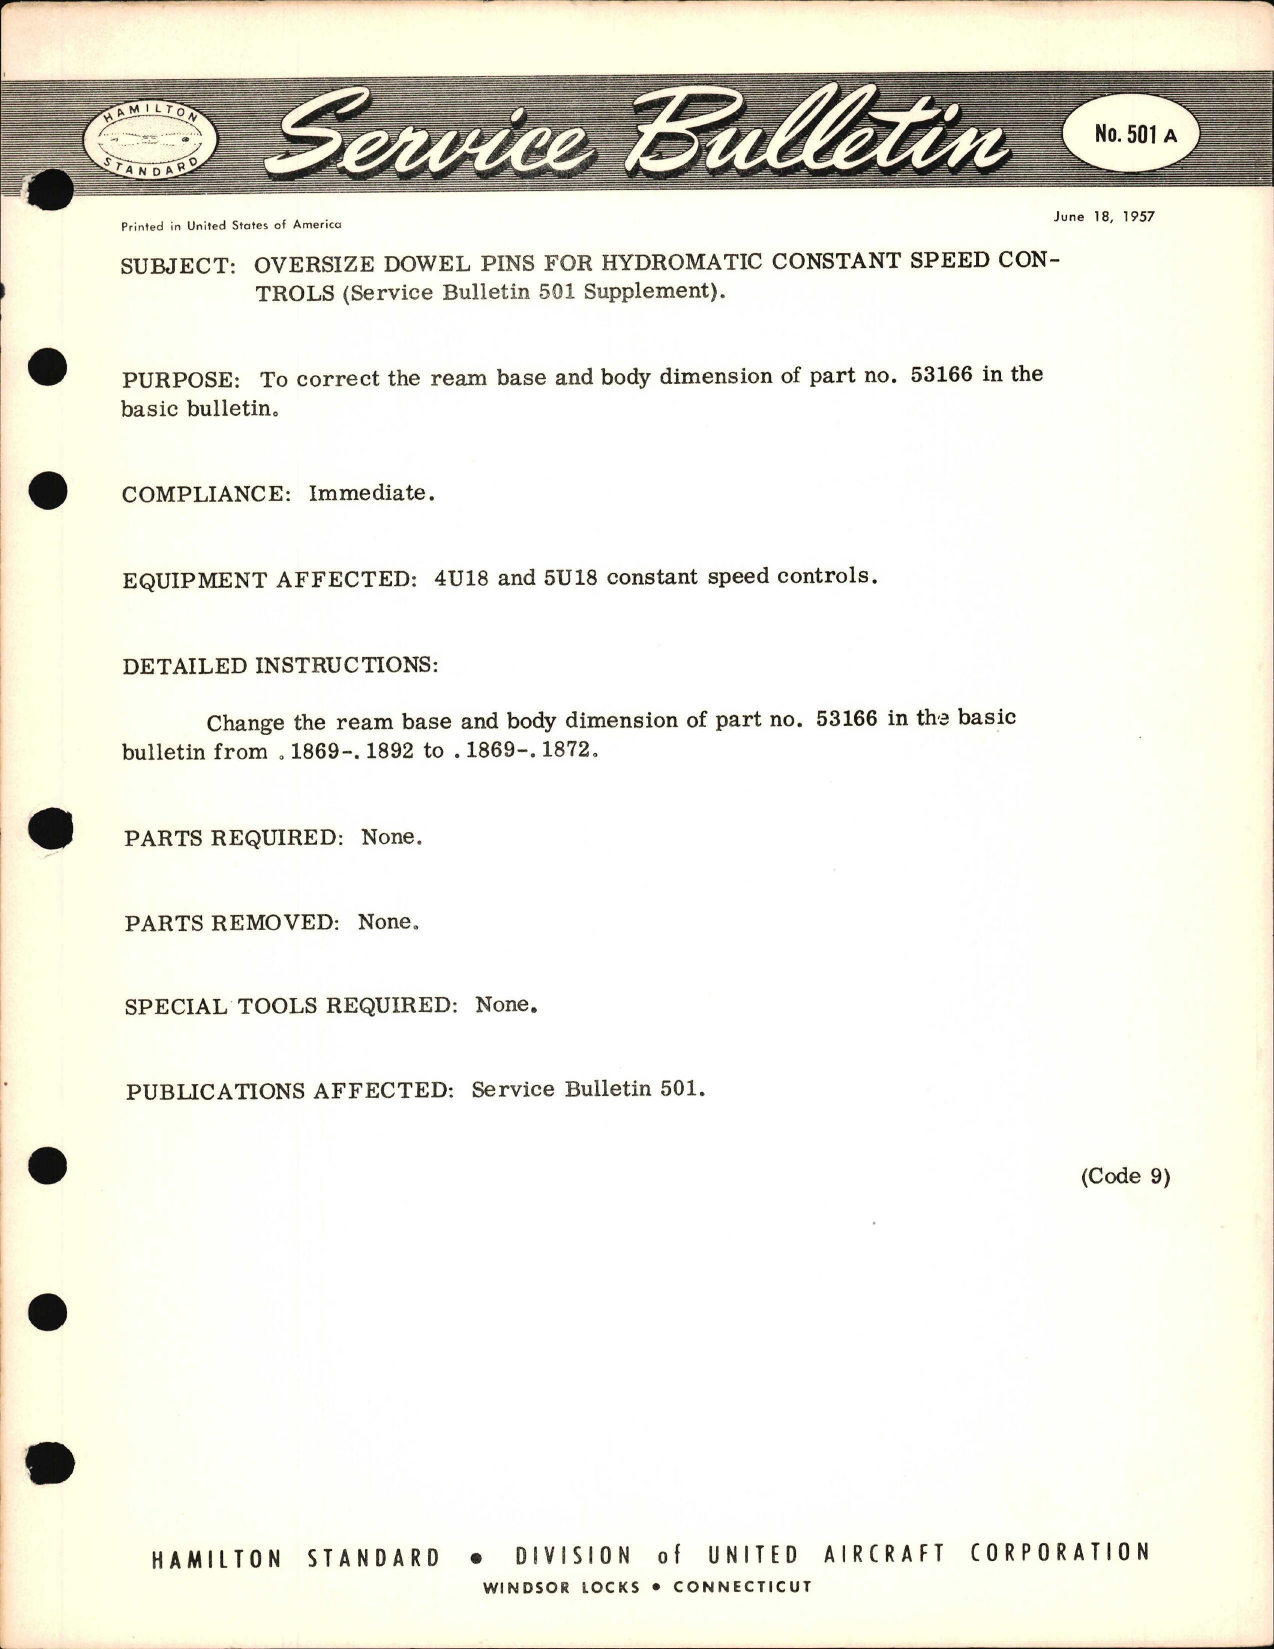 Sample page 1 from AirCorps Library document: Oversize Dowel Pins for Hydromatic Constant Speed Controls